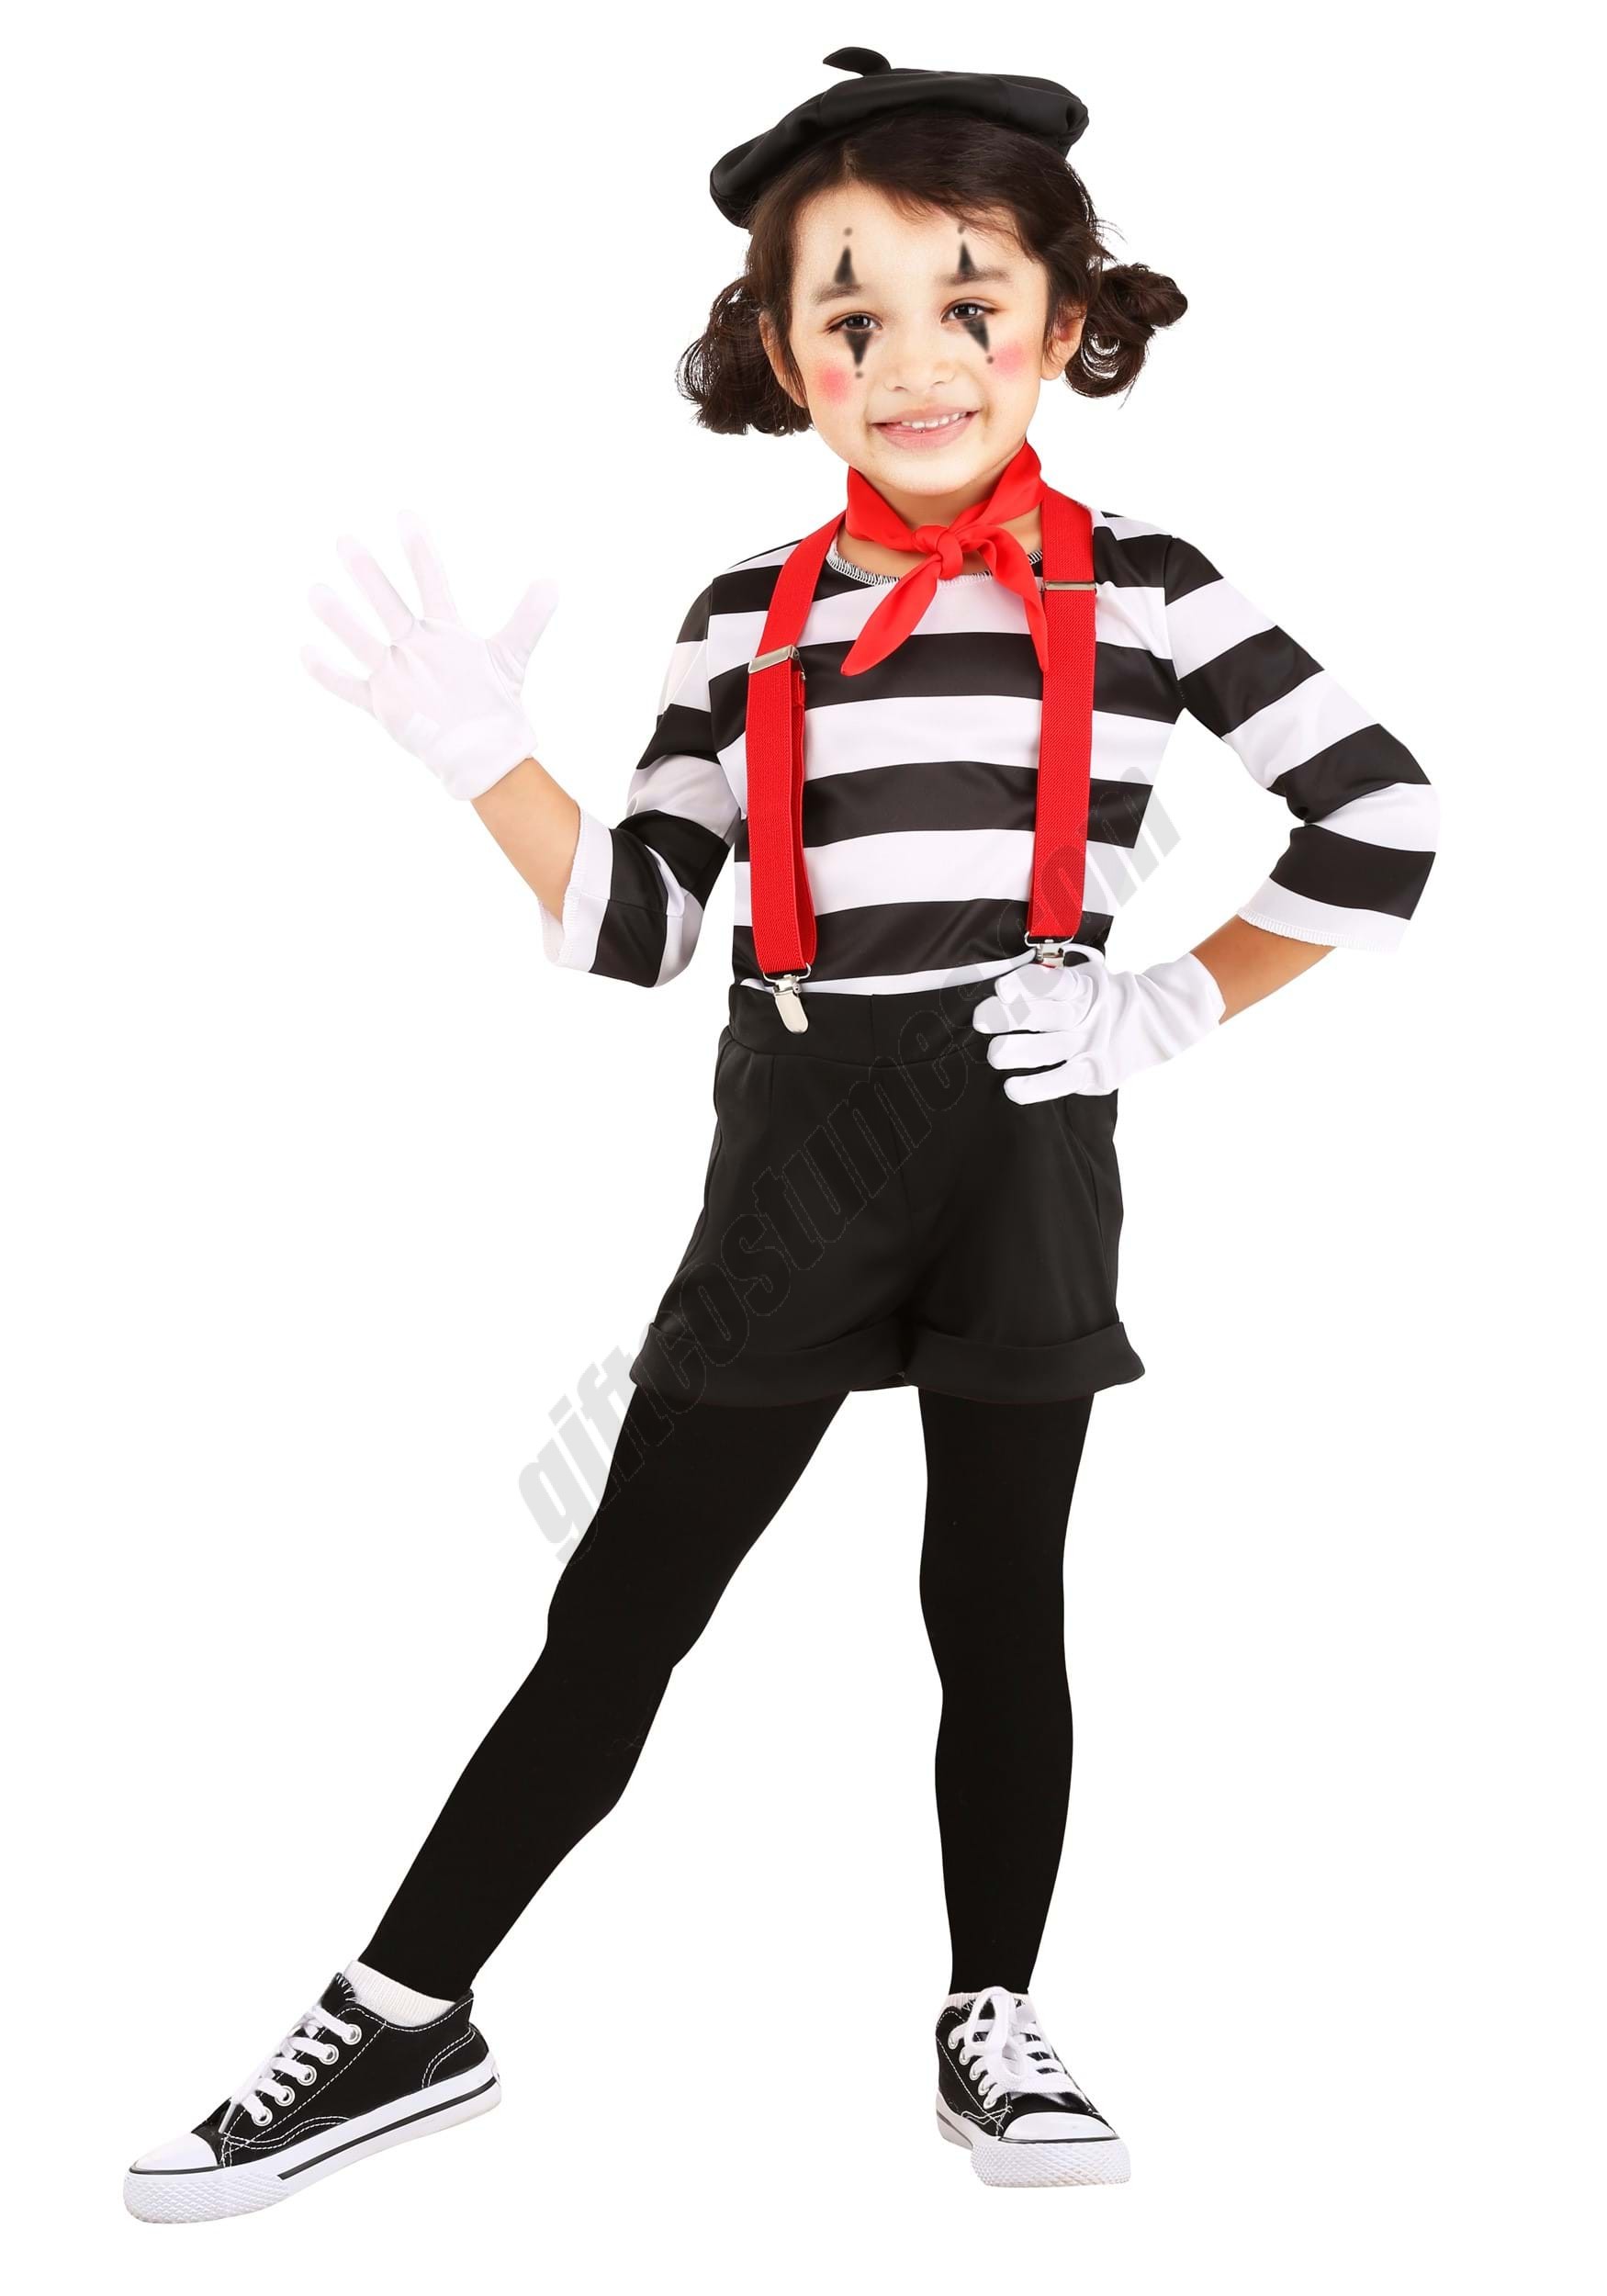 Classic Mime Toddler Costume Promotions - Classic Mime Toddler Costume Promotions